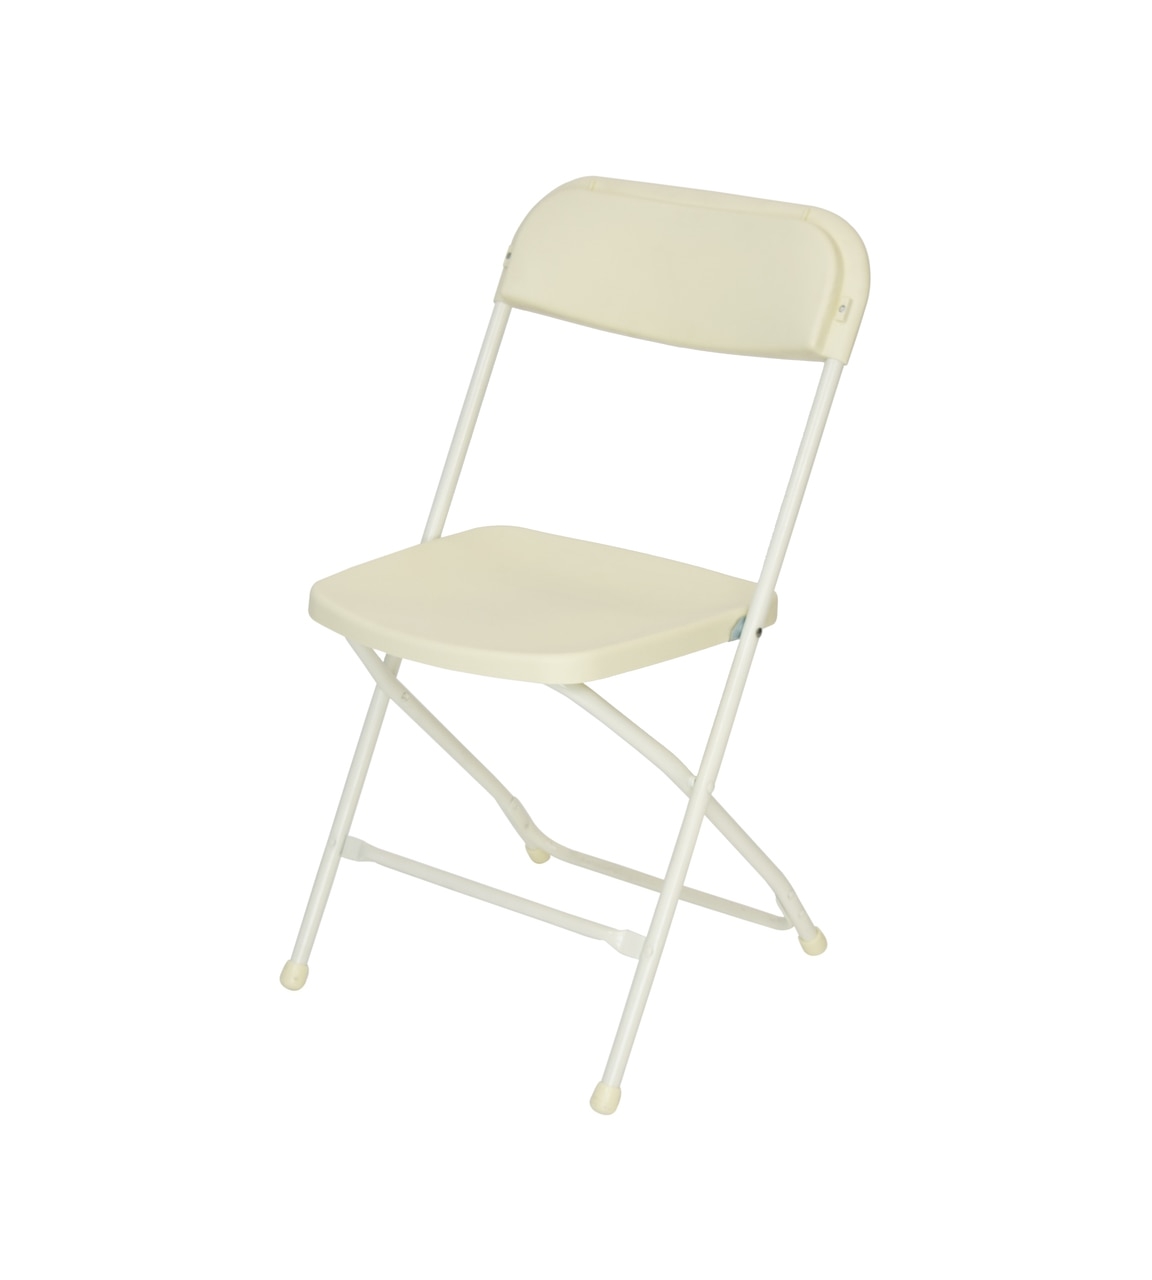 act 1000 ivory ivory plastic folding chair front angle 48557 1520353907 jpg c 2